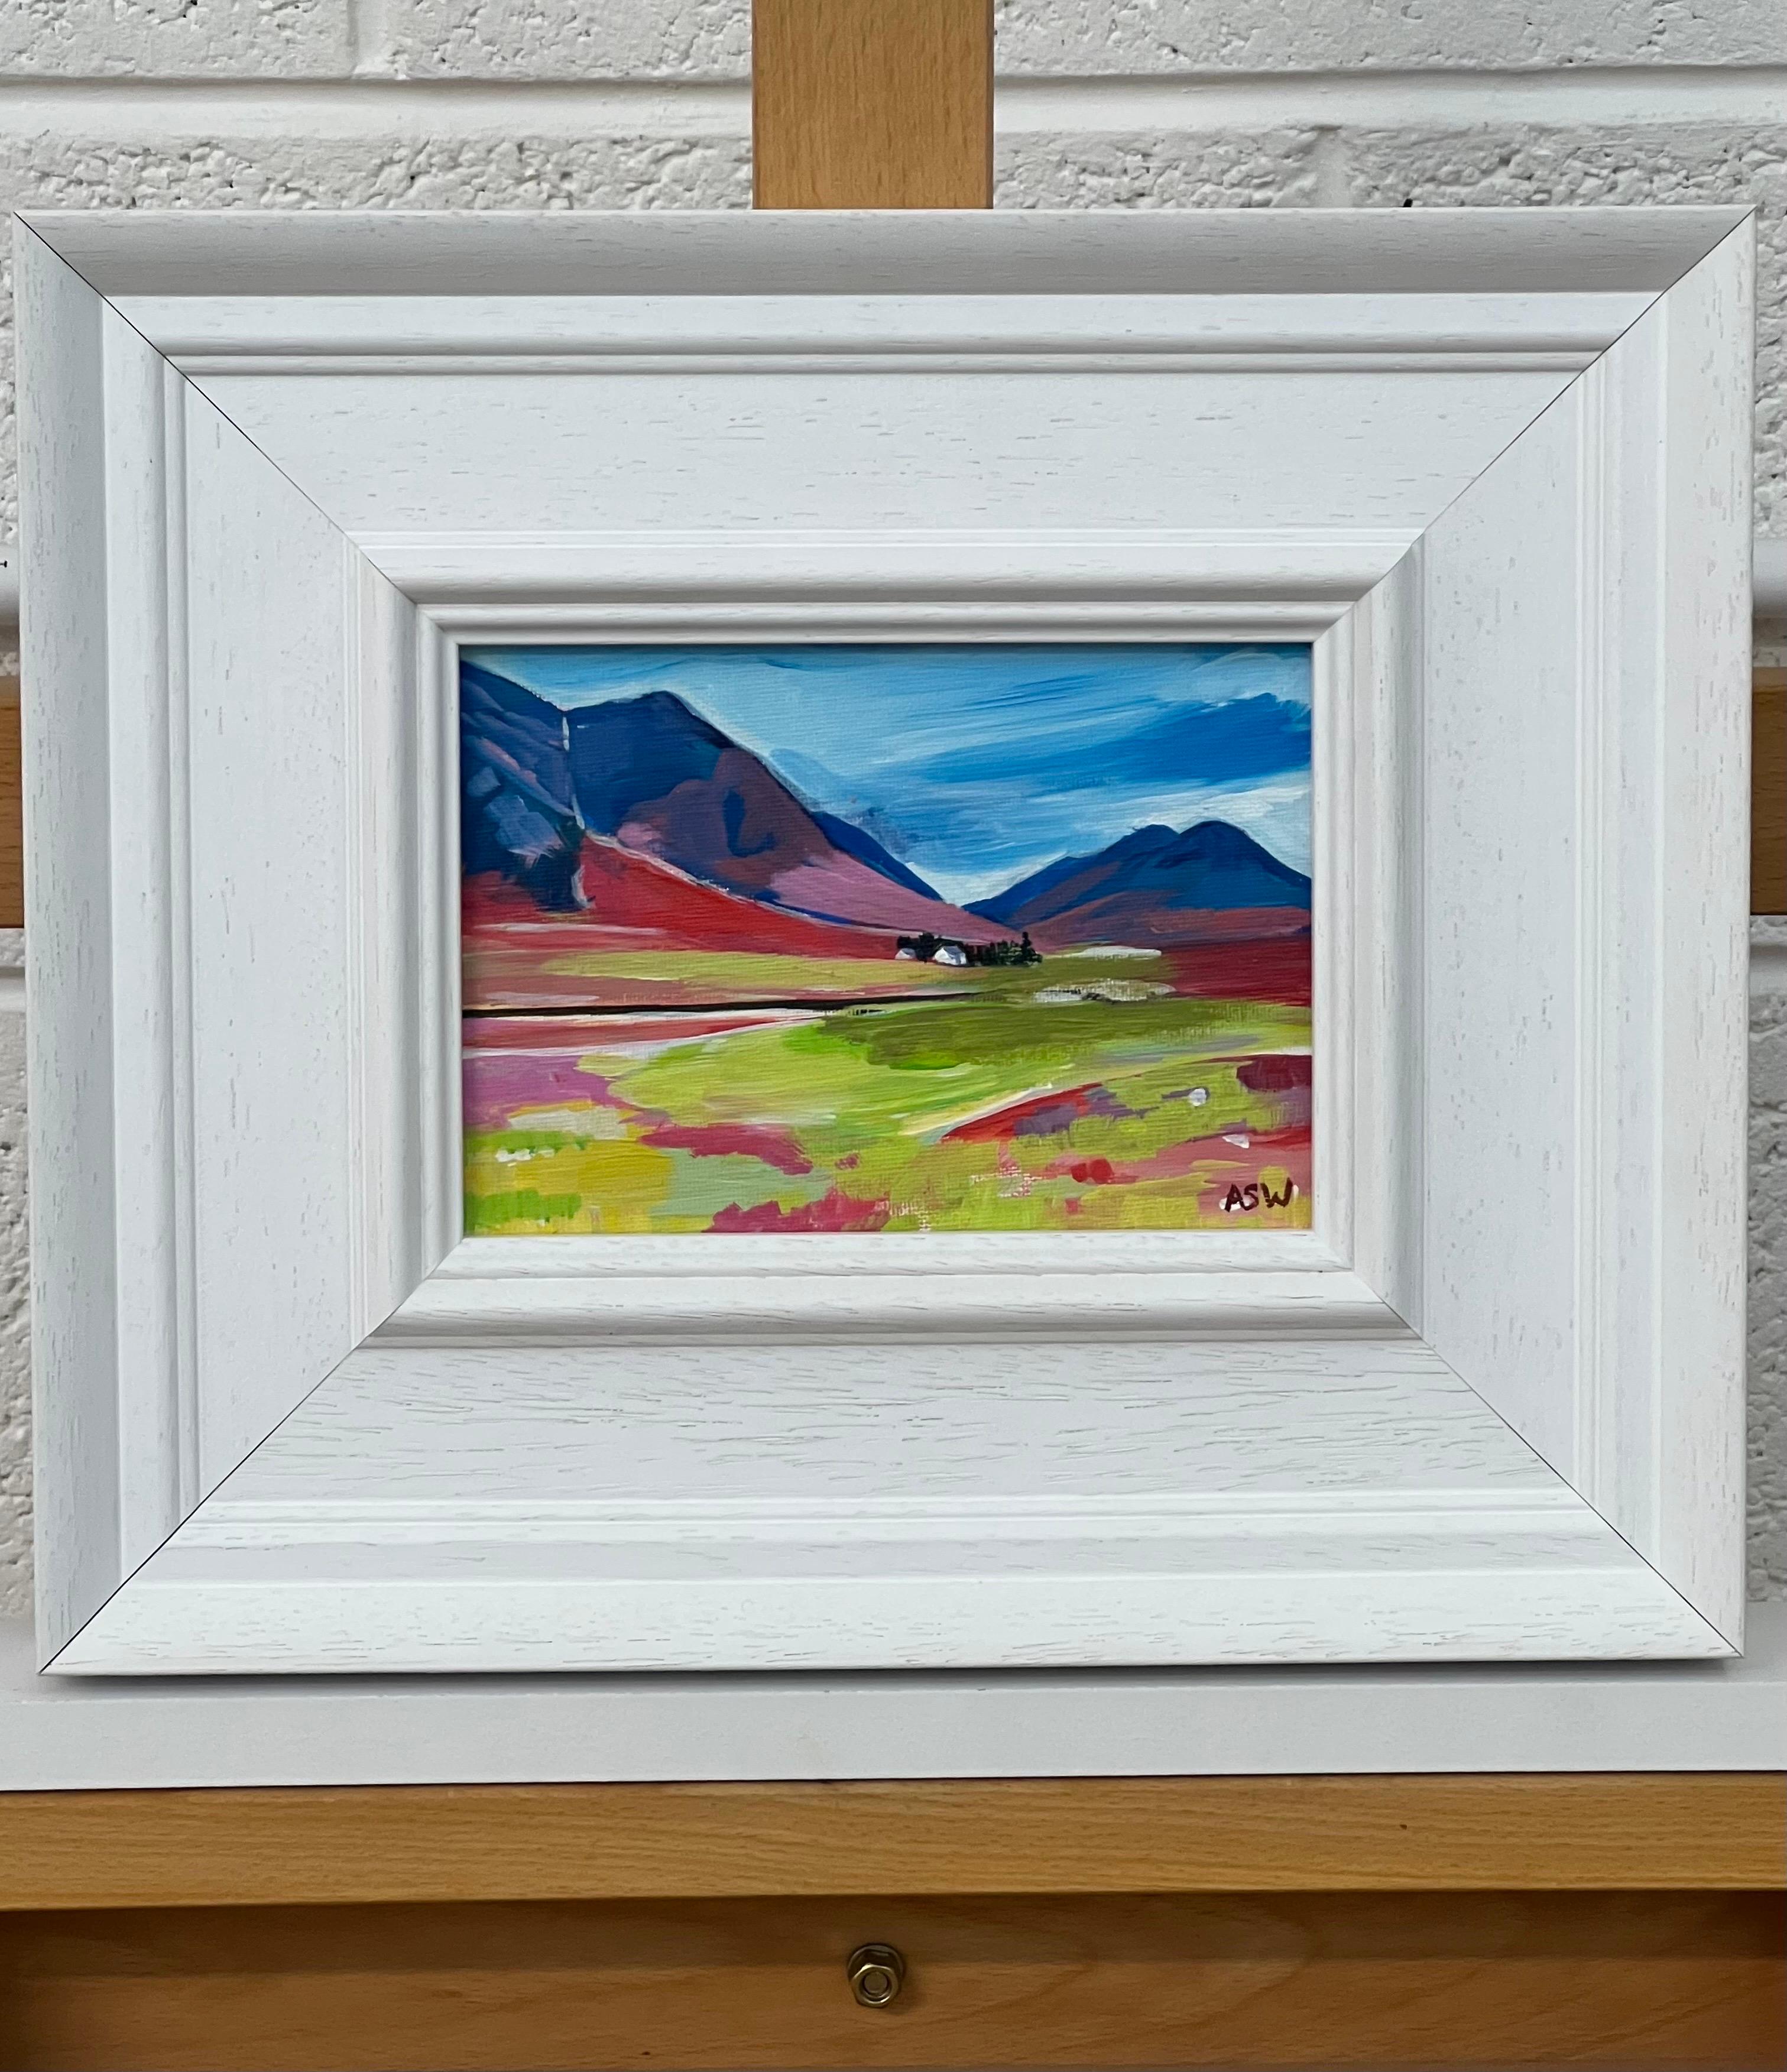 Miniature Landscape Study of the Scottish Highlands by Contemporary British Artist Angela Wakefield

Art measures 7 x 5 inches
Frame measures 12 x 10 inches 

Angela Wakefield has twice been on the front cover of ‘Art of England’ and featured in